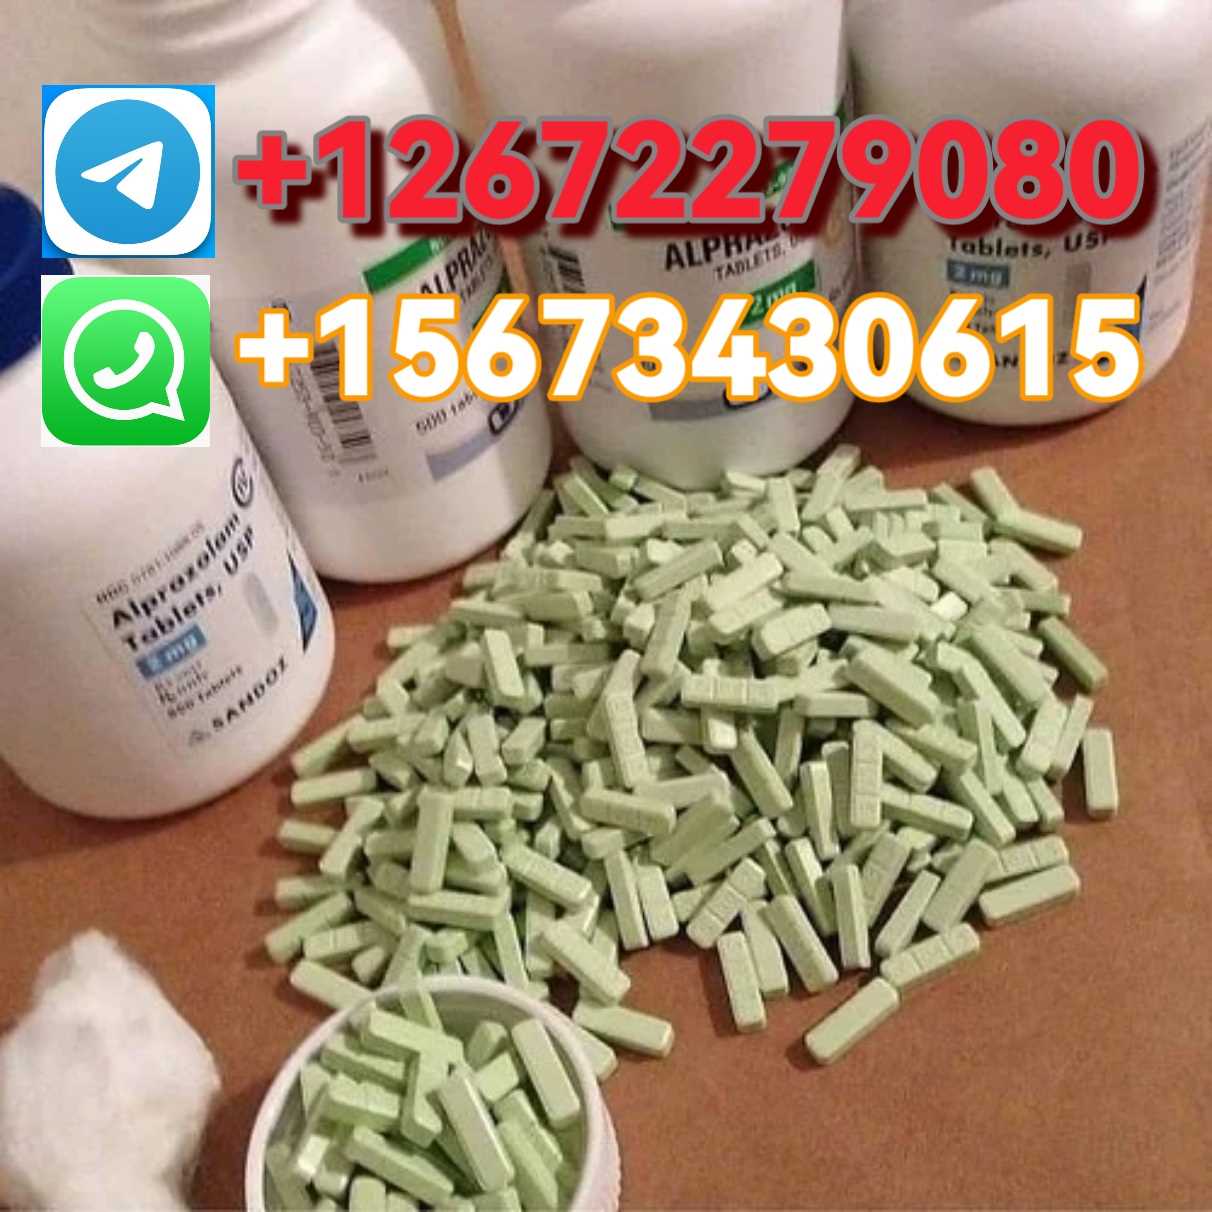 +12672279080 to buy xanax pills with tramadol in oslo norway and helsinki finland